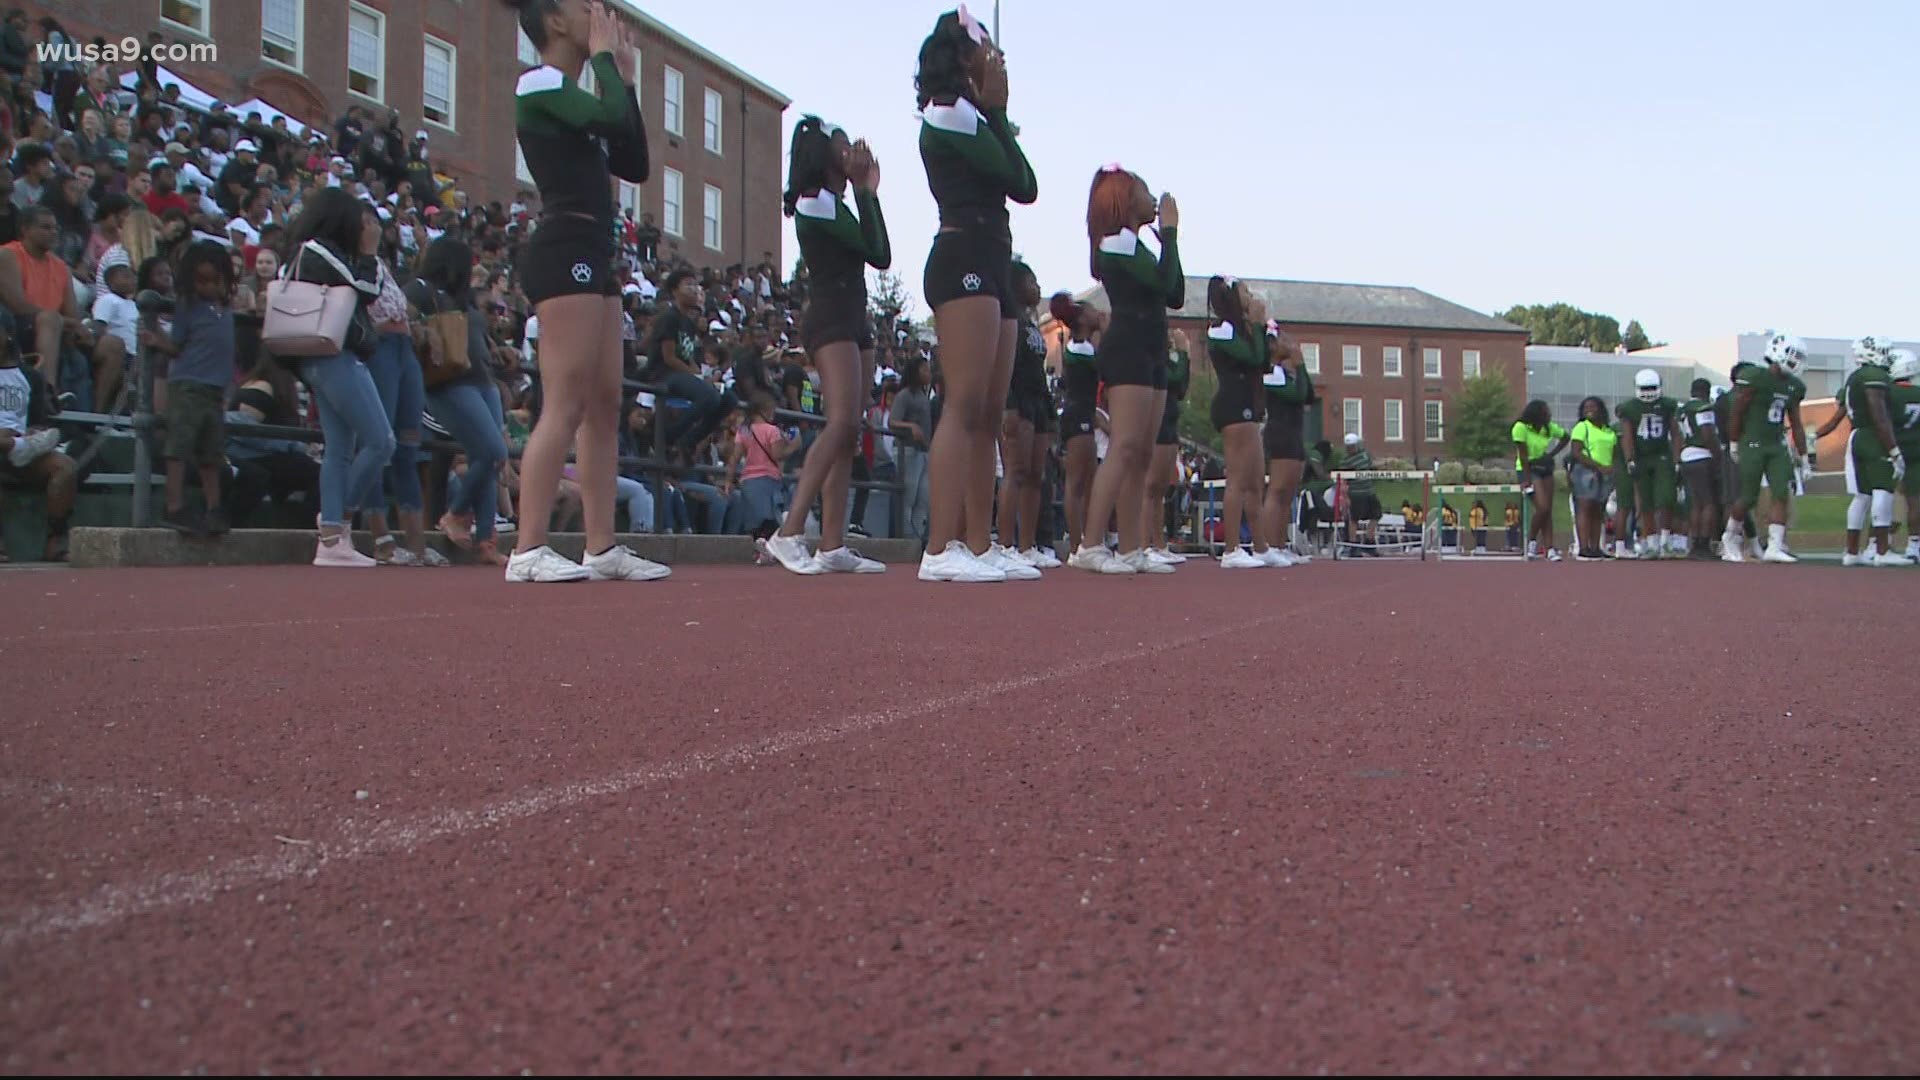 An online petition showing support for Virginia high school sideline cheerleaders had gathered over 2,700 signatures as of Friday evening.